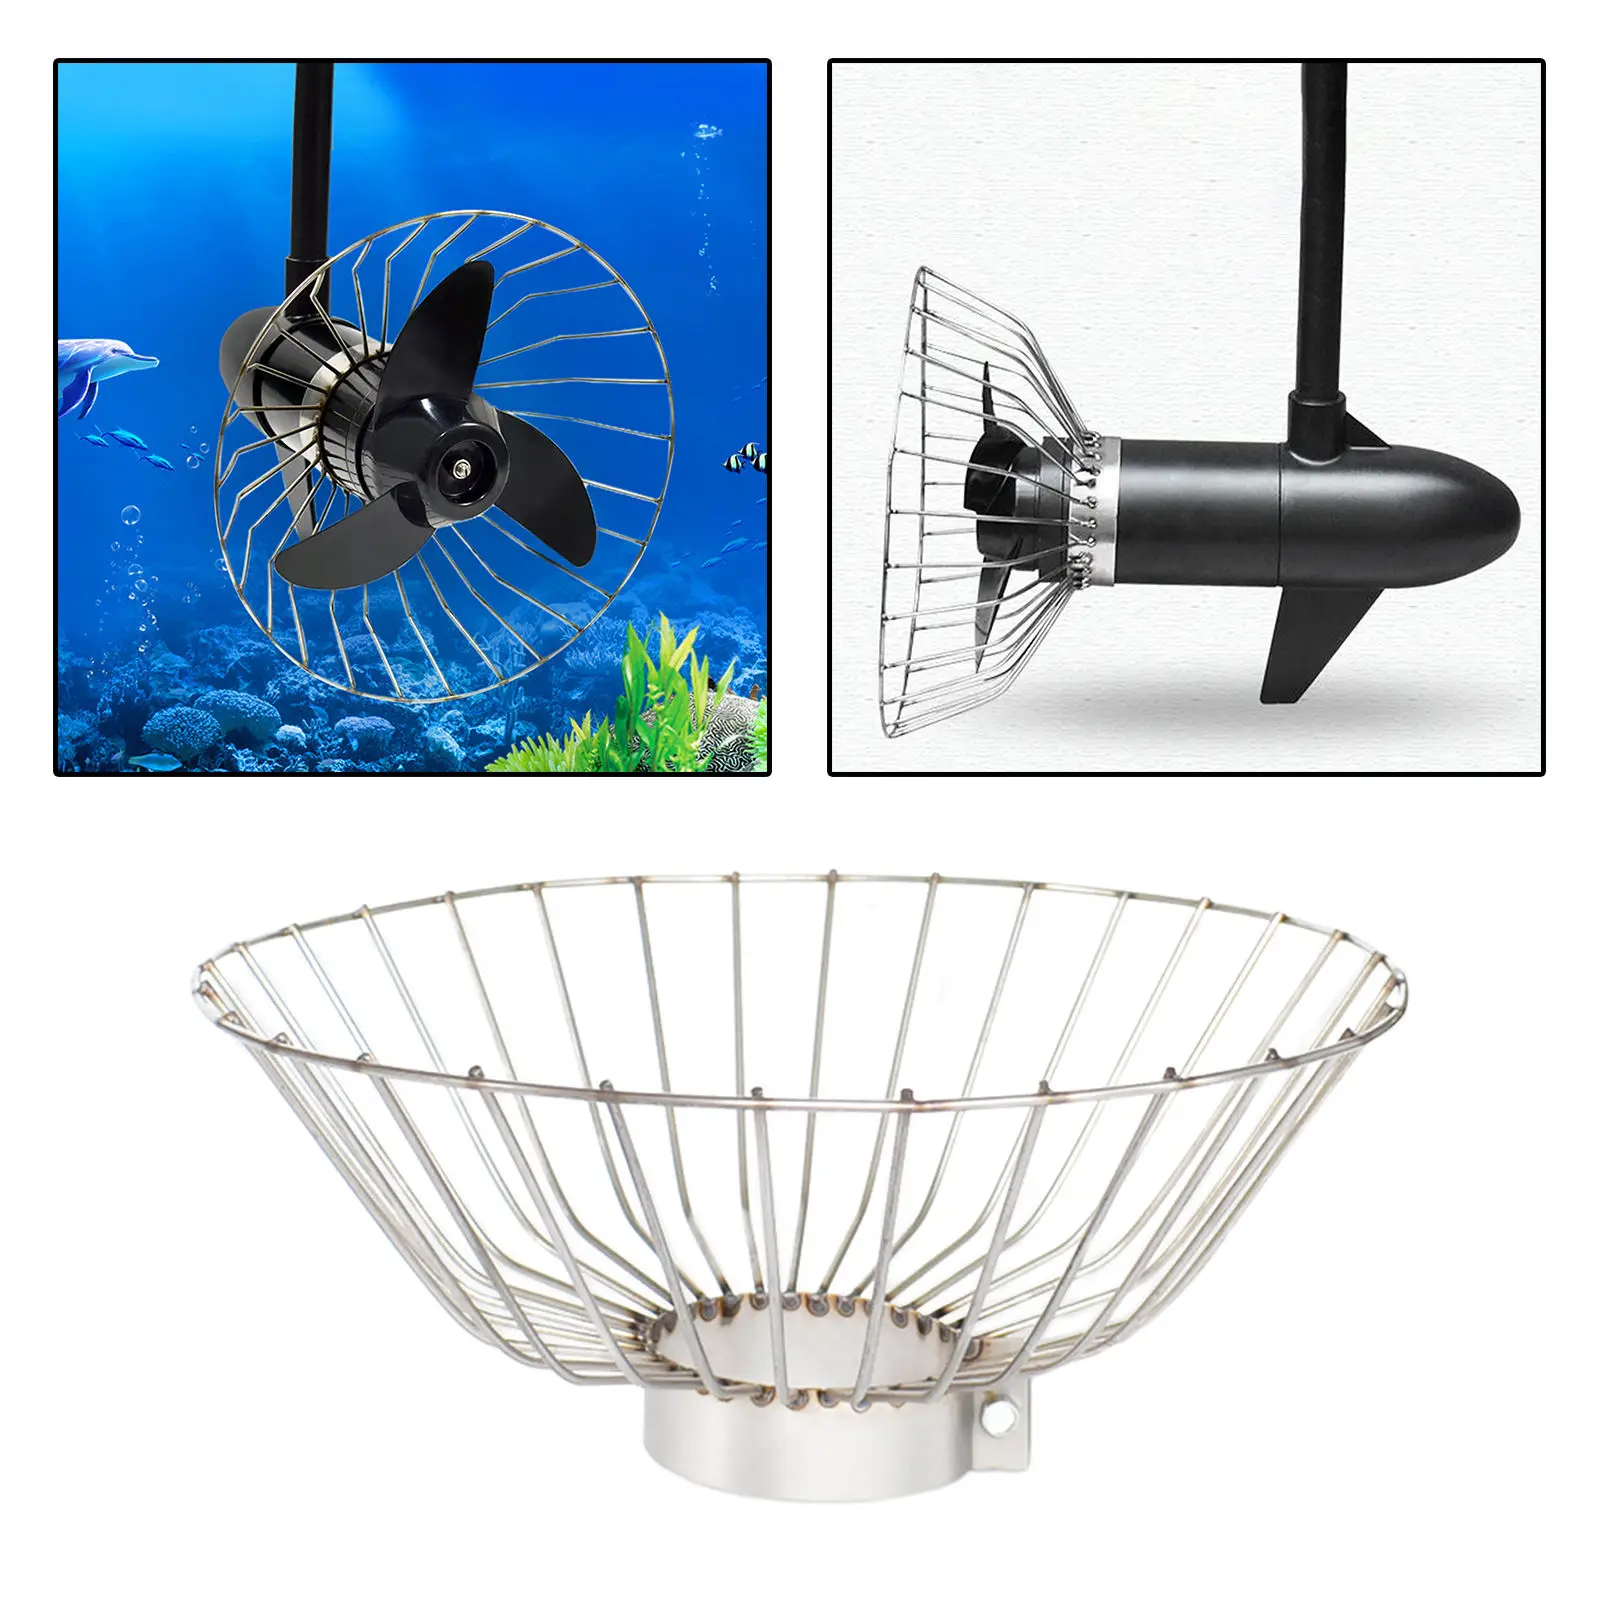 Propeller Safety Net Cover, Propeller Protector, Anti-entanglement, Waterproof Plant, Canoe Dinghy Protective Net Cover Guard